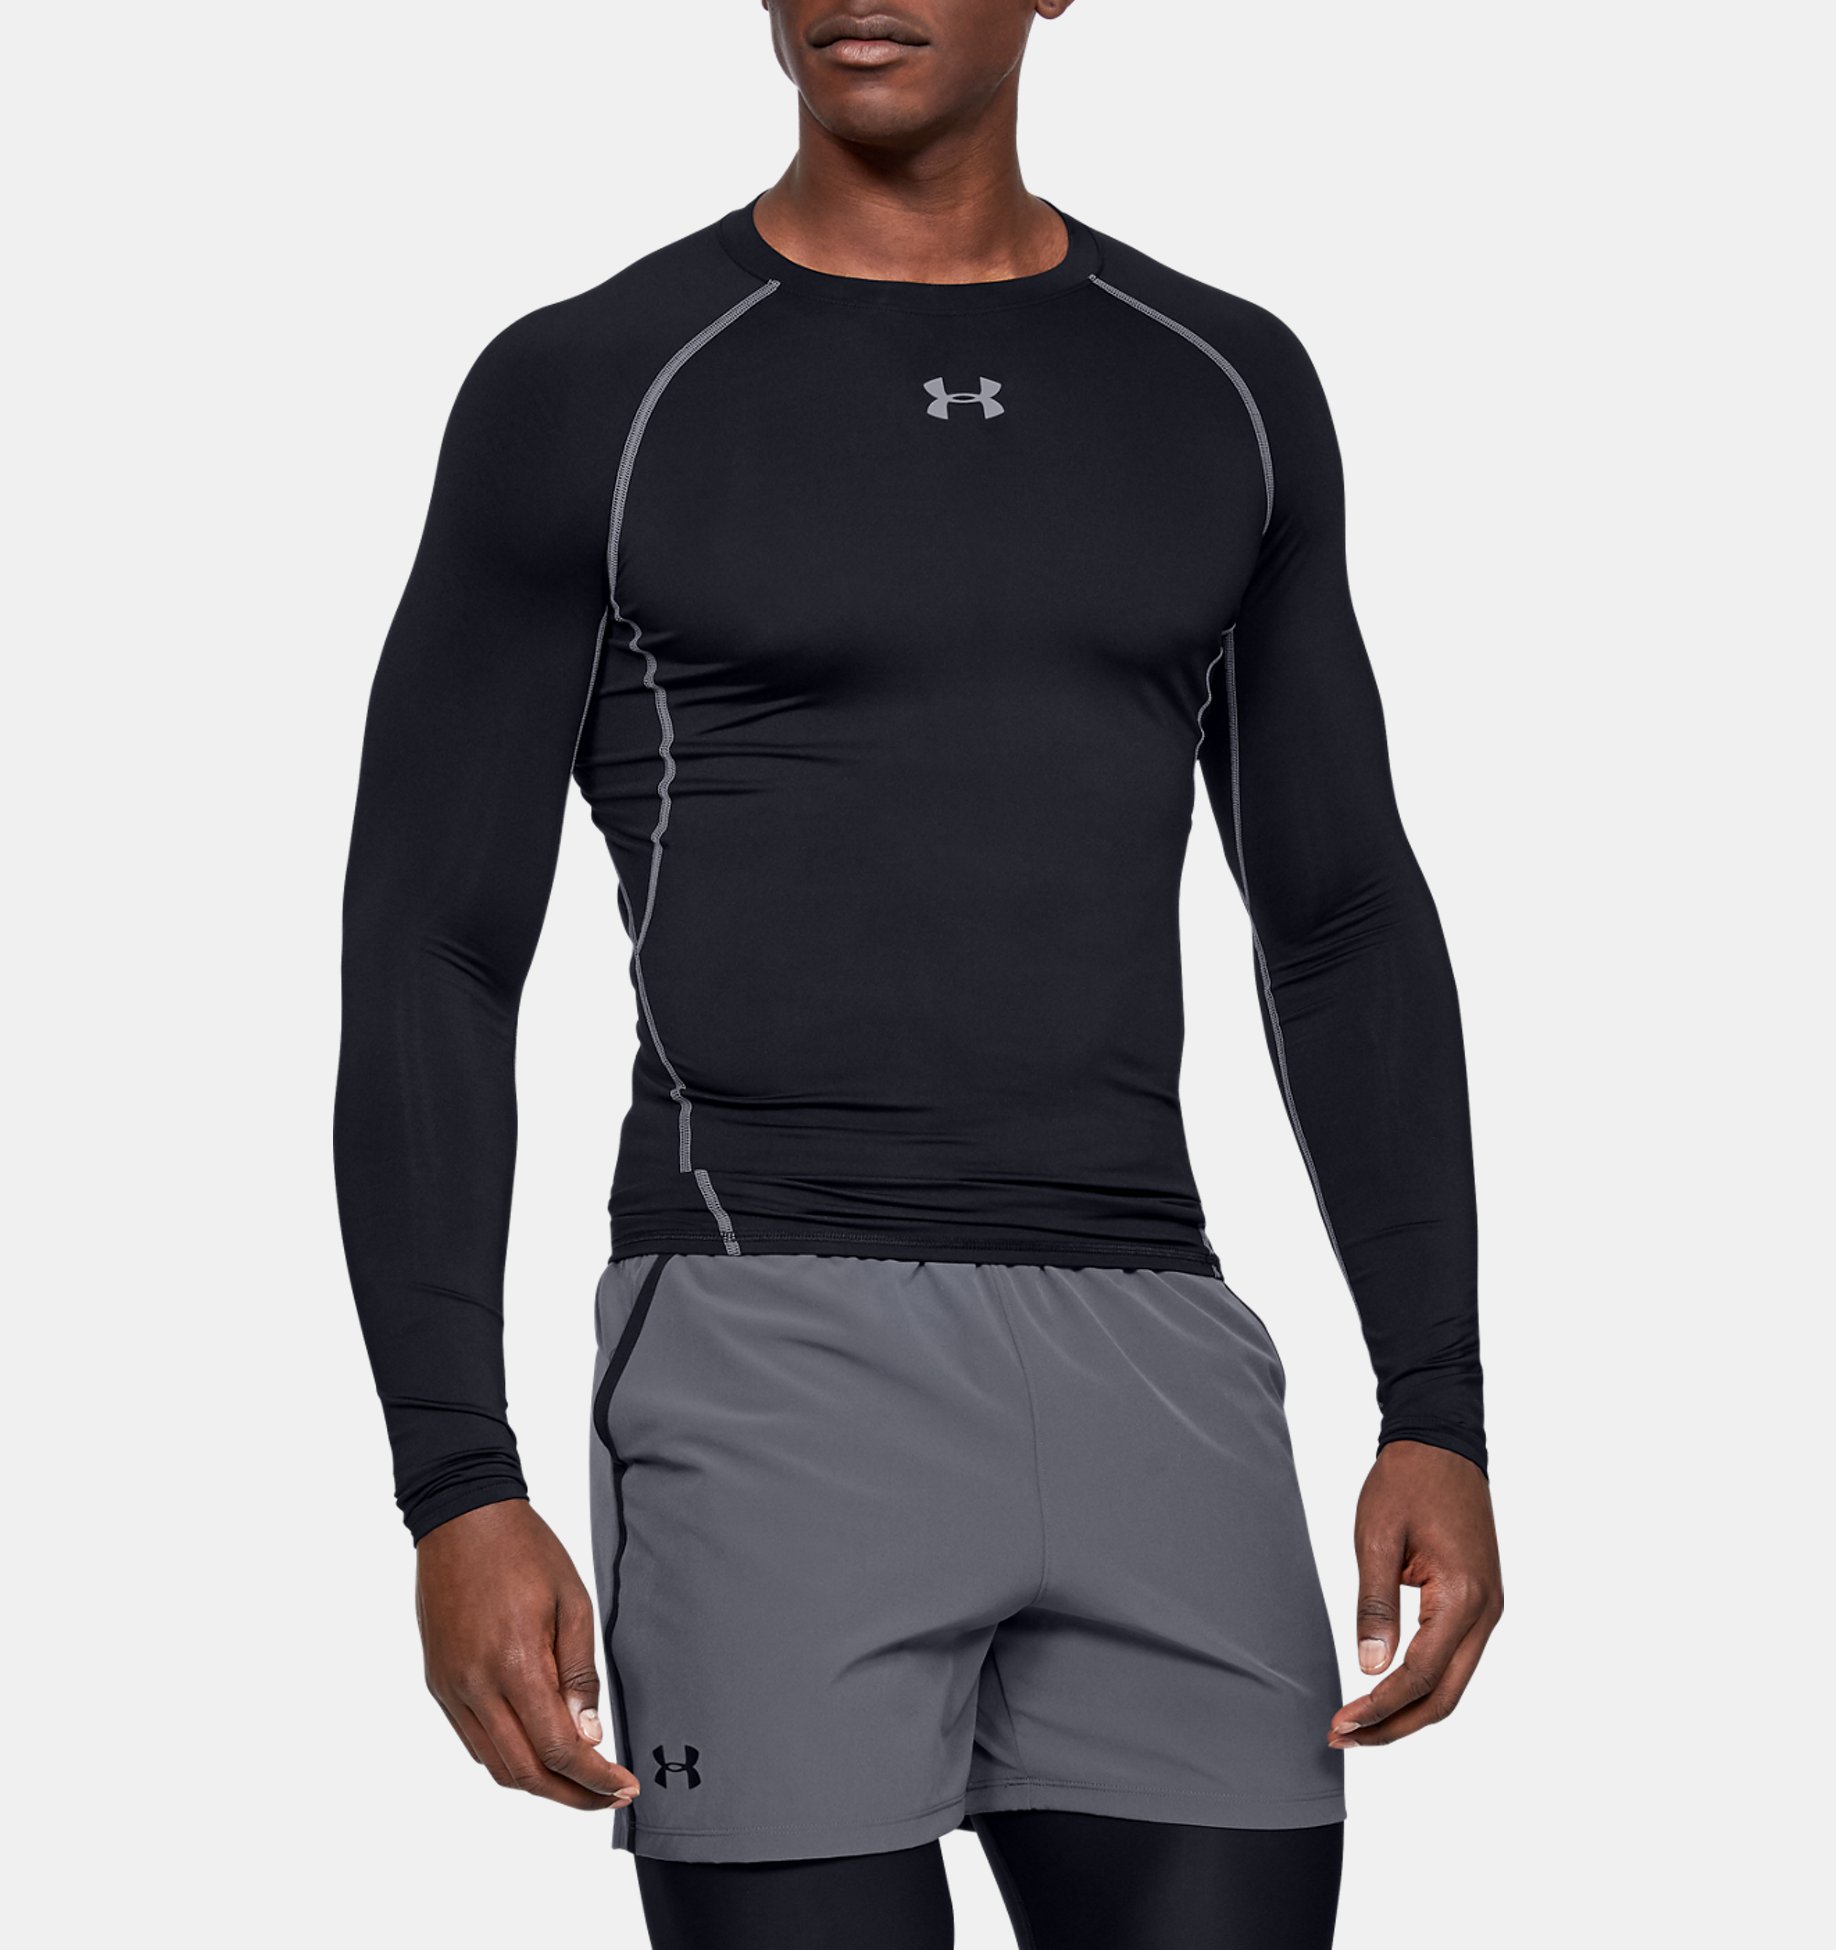 New Under Armour Mens HG ArmourVent Fitted Tee Base Layer Top T Shirt S,M,L,XL 